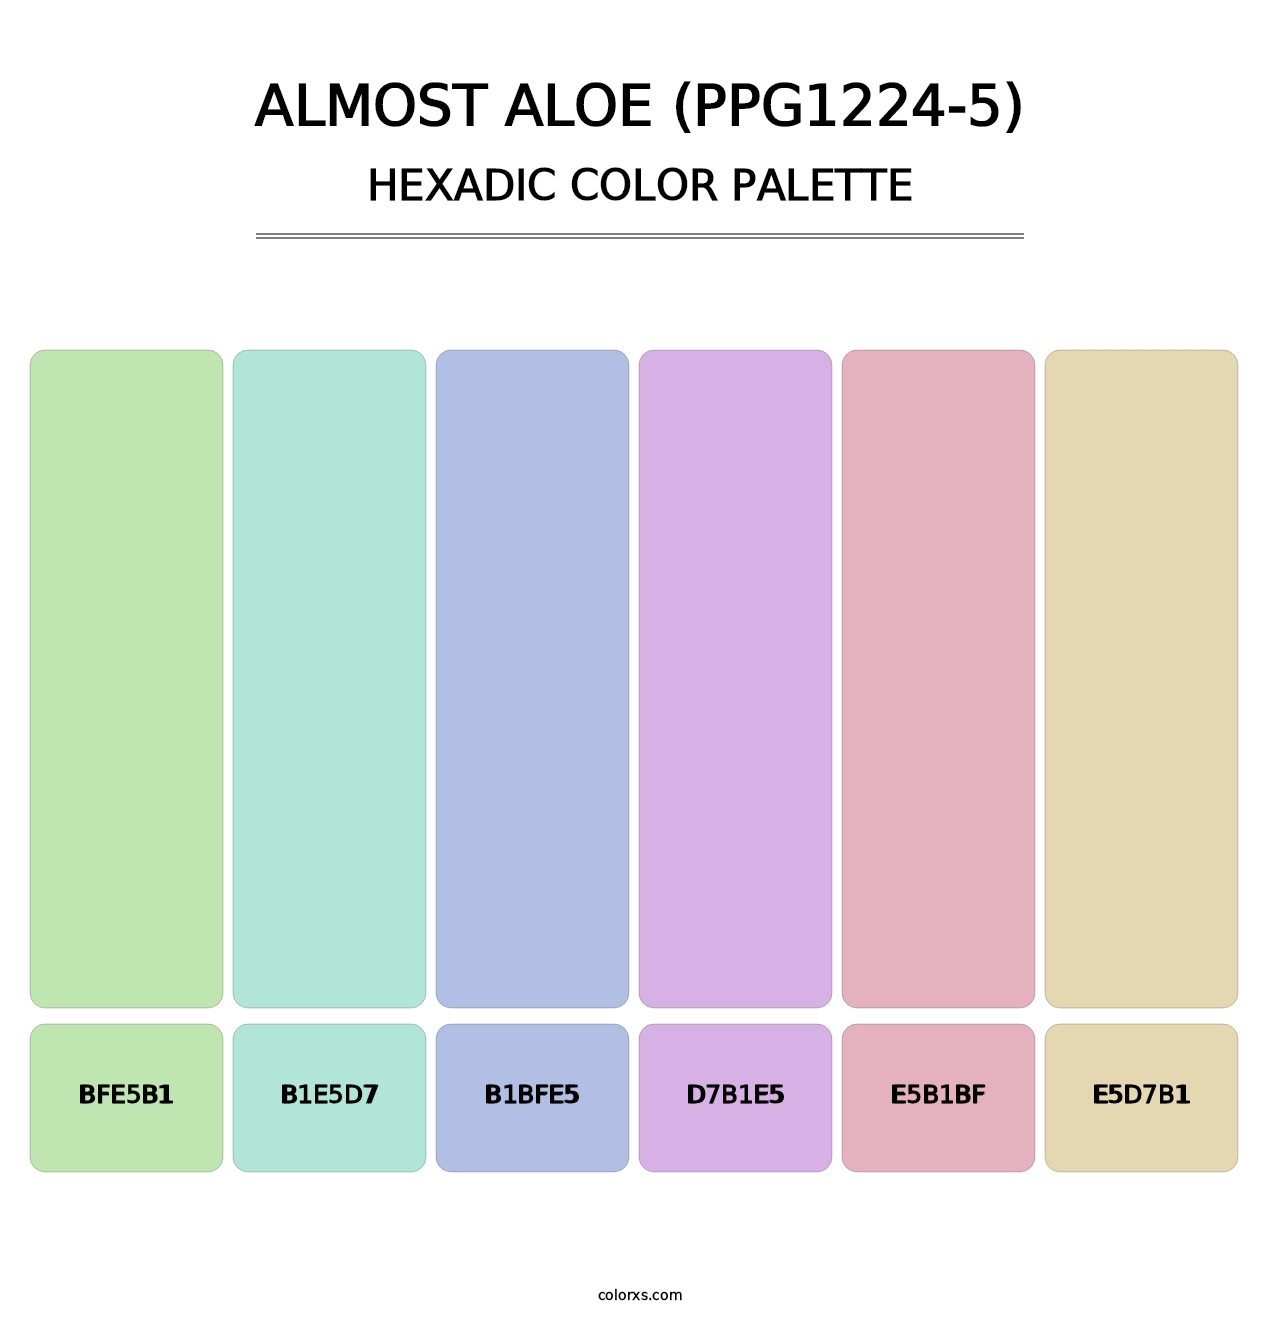 Almost Aloe (PPG1224-5) - Hexadic Color Palette